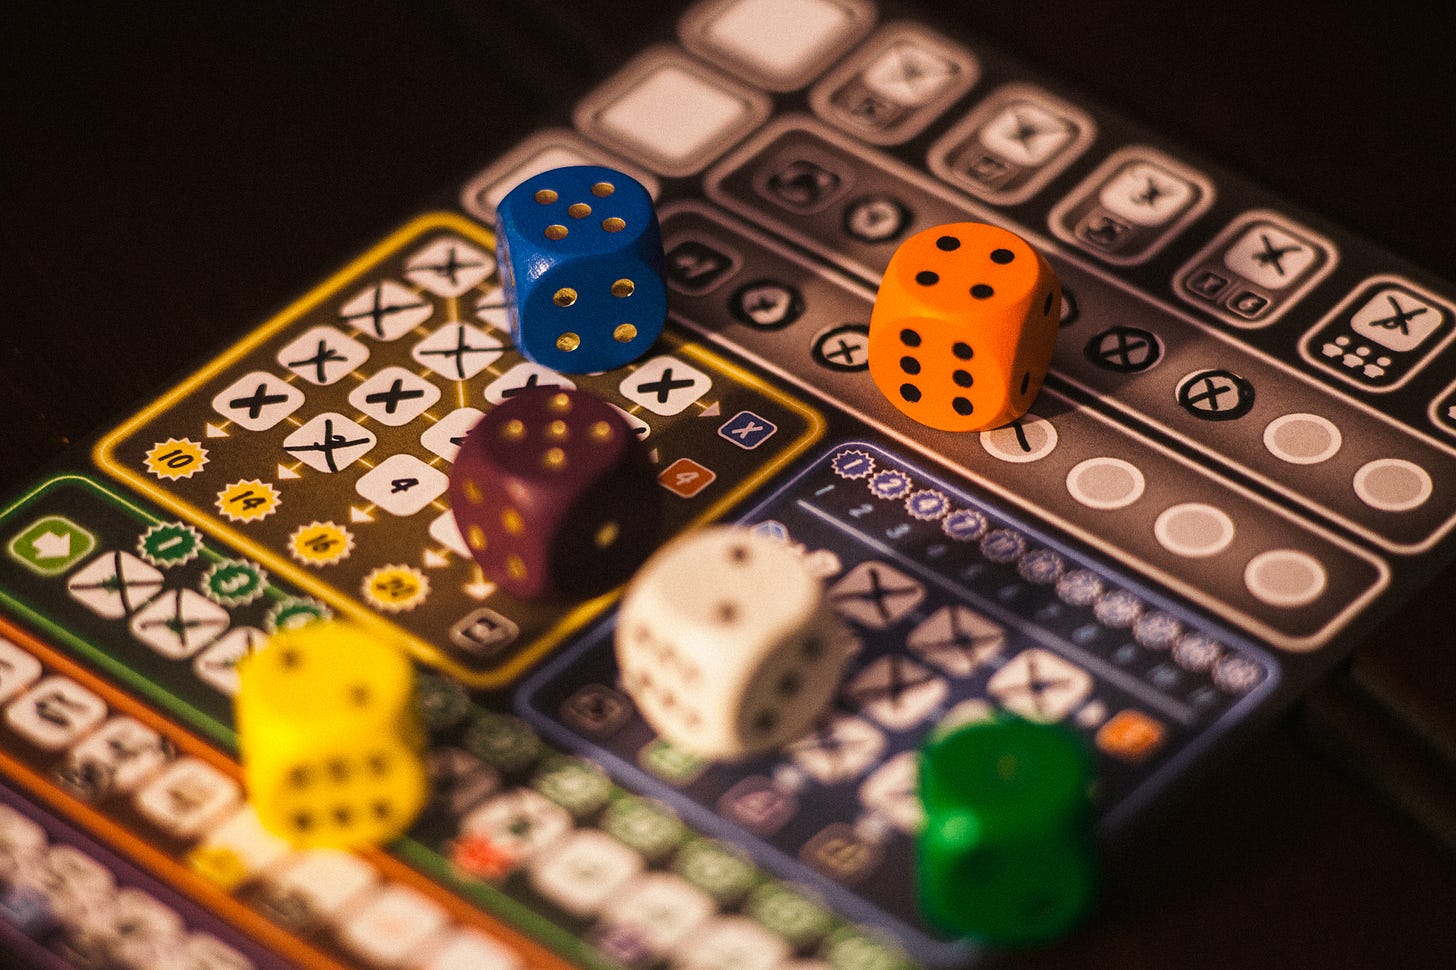 The roll-and-write game That’s Pretty Clever being played. Six dice are present on the paper sheet used for the game.